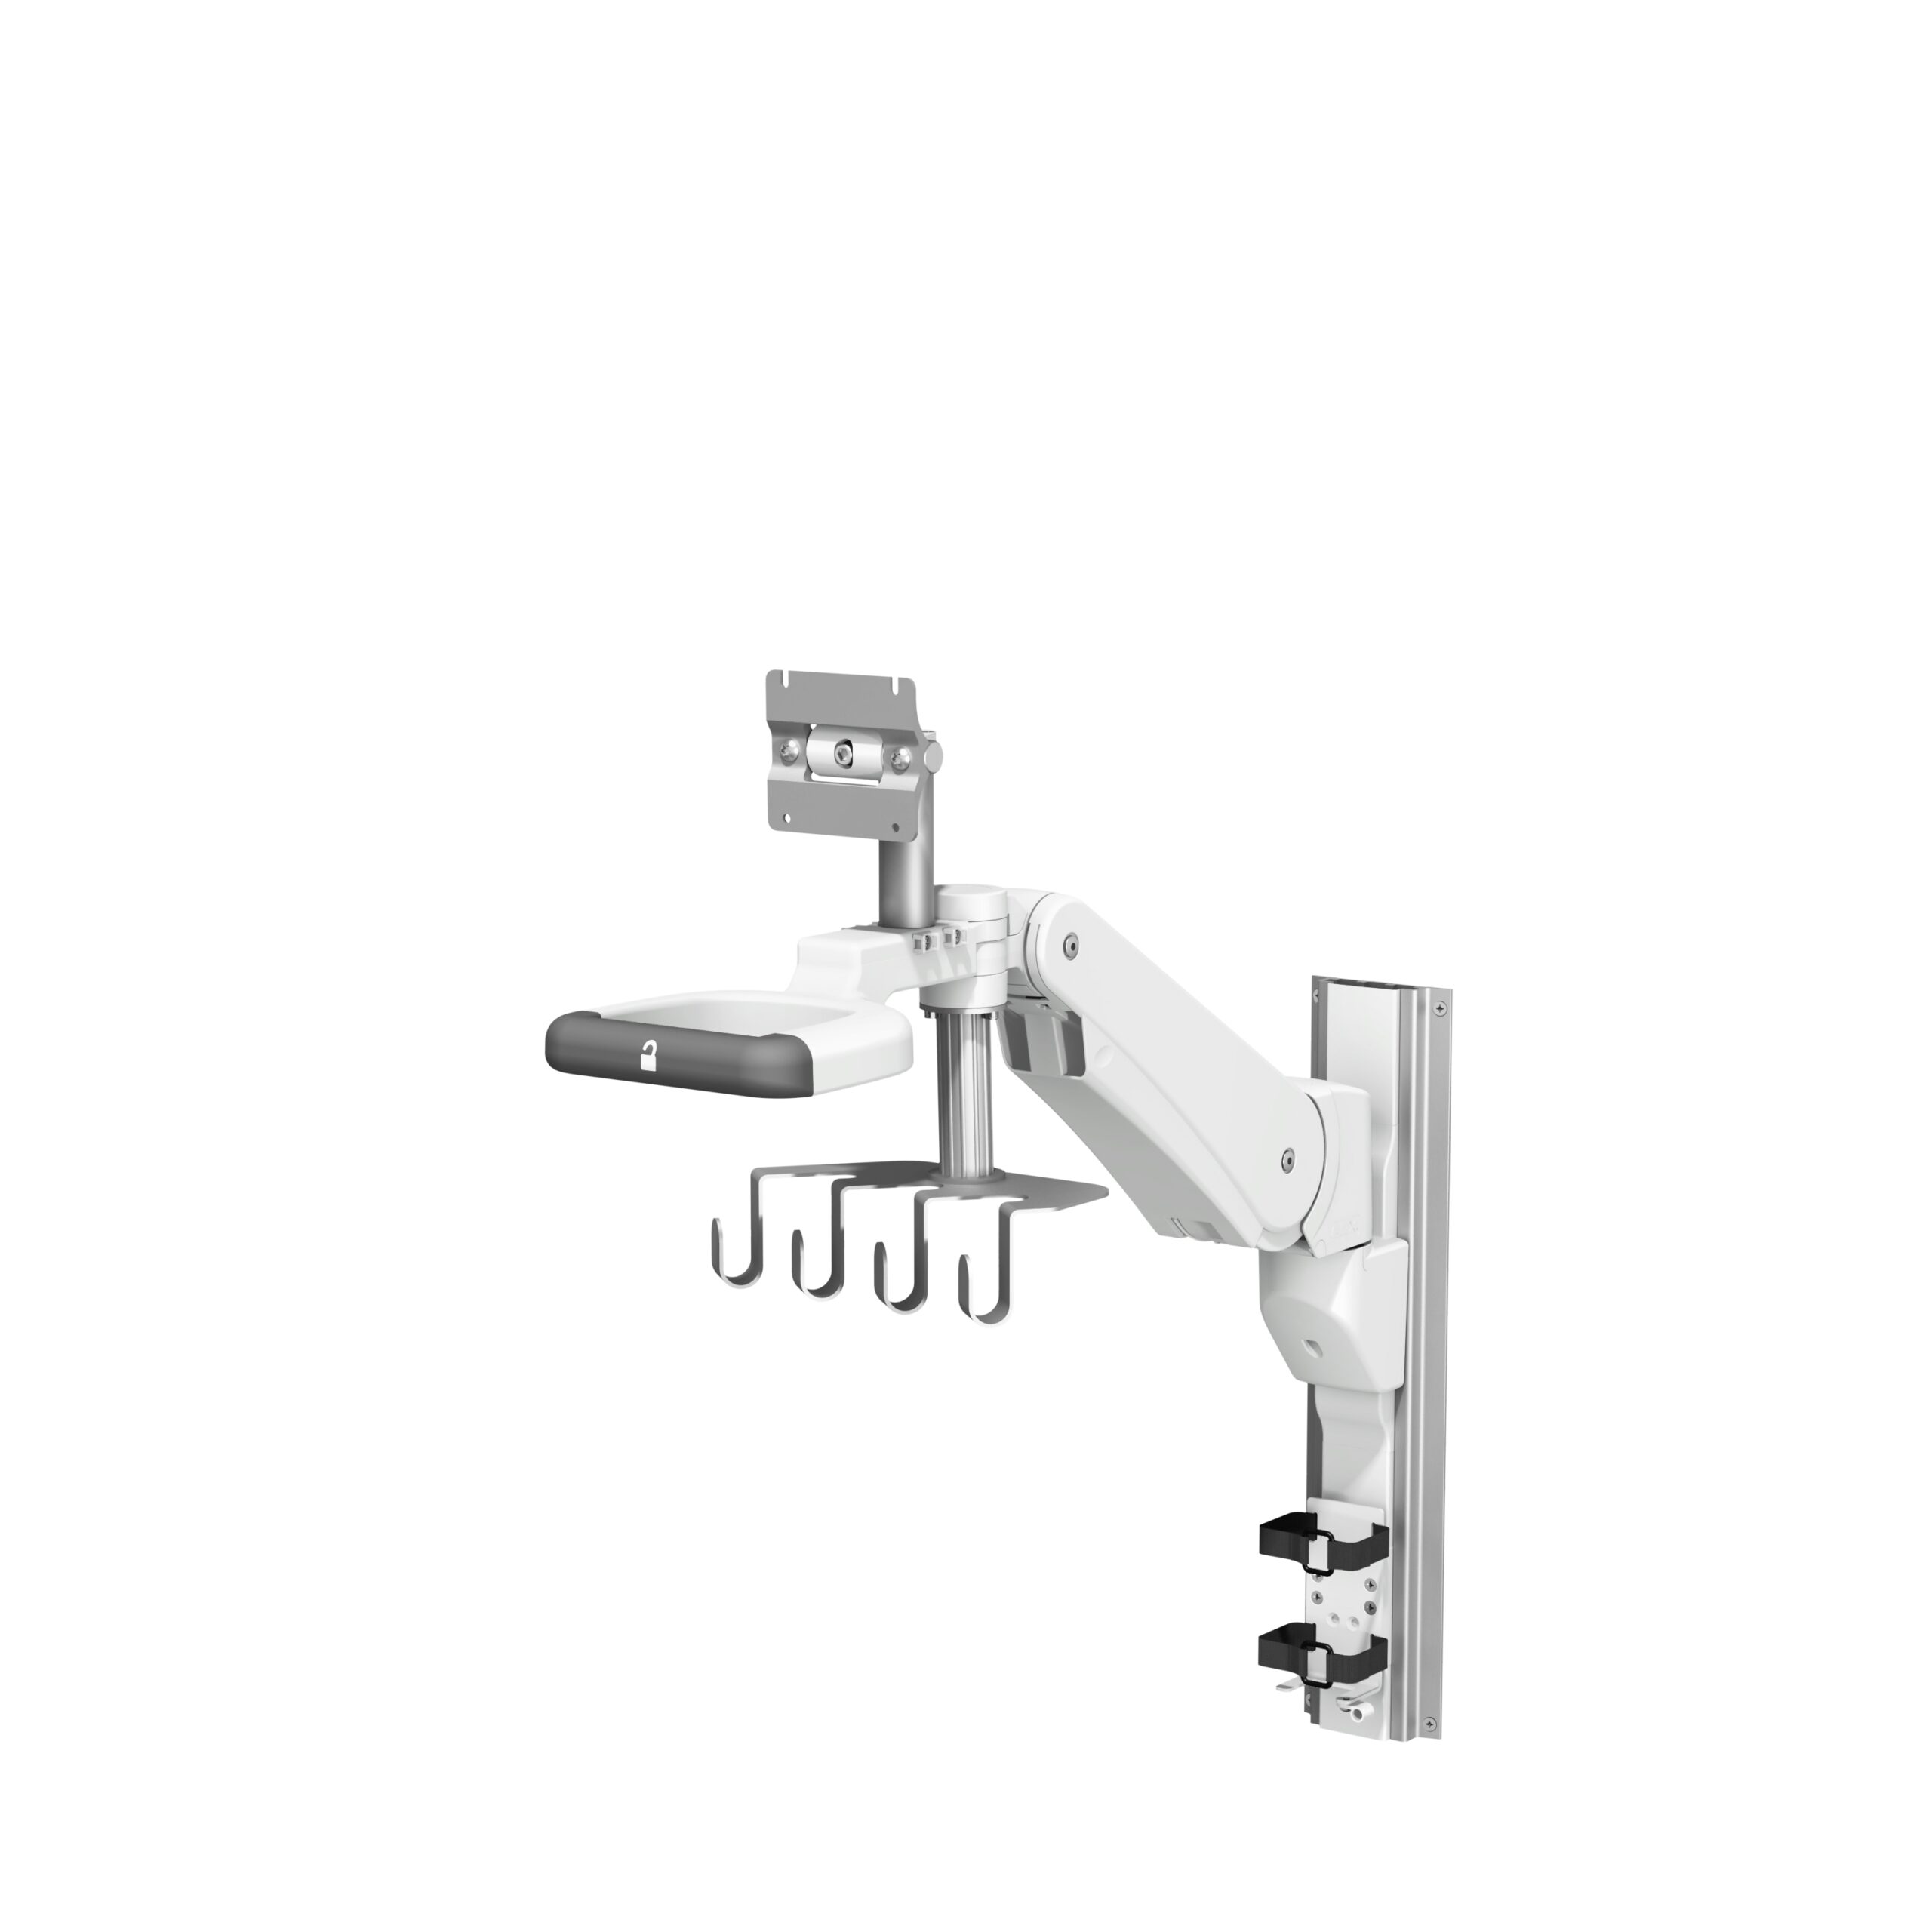 GE Healthcare Venue Go™ PoC Ultrasound on VHM-PL Variable Height Arm with Vertical Position Lock